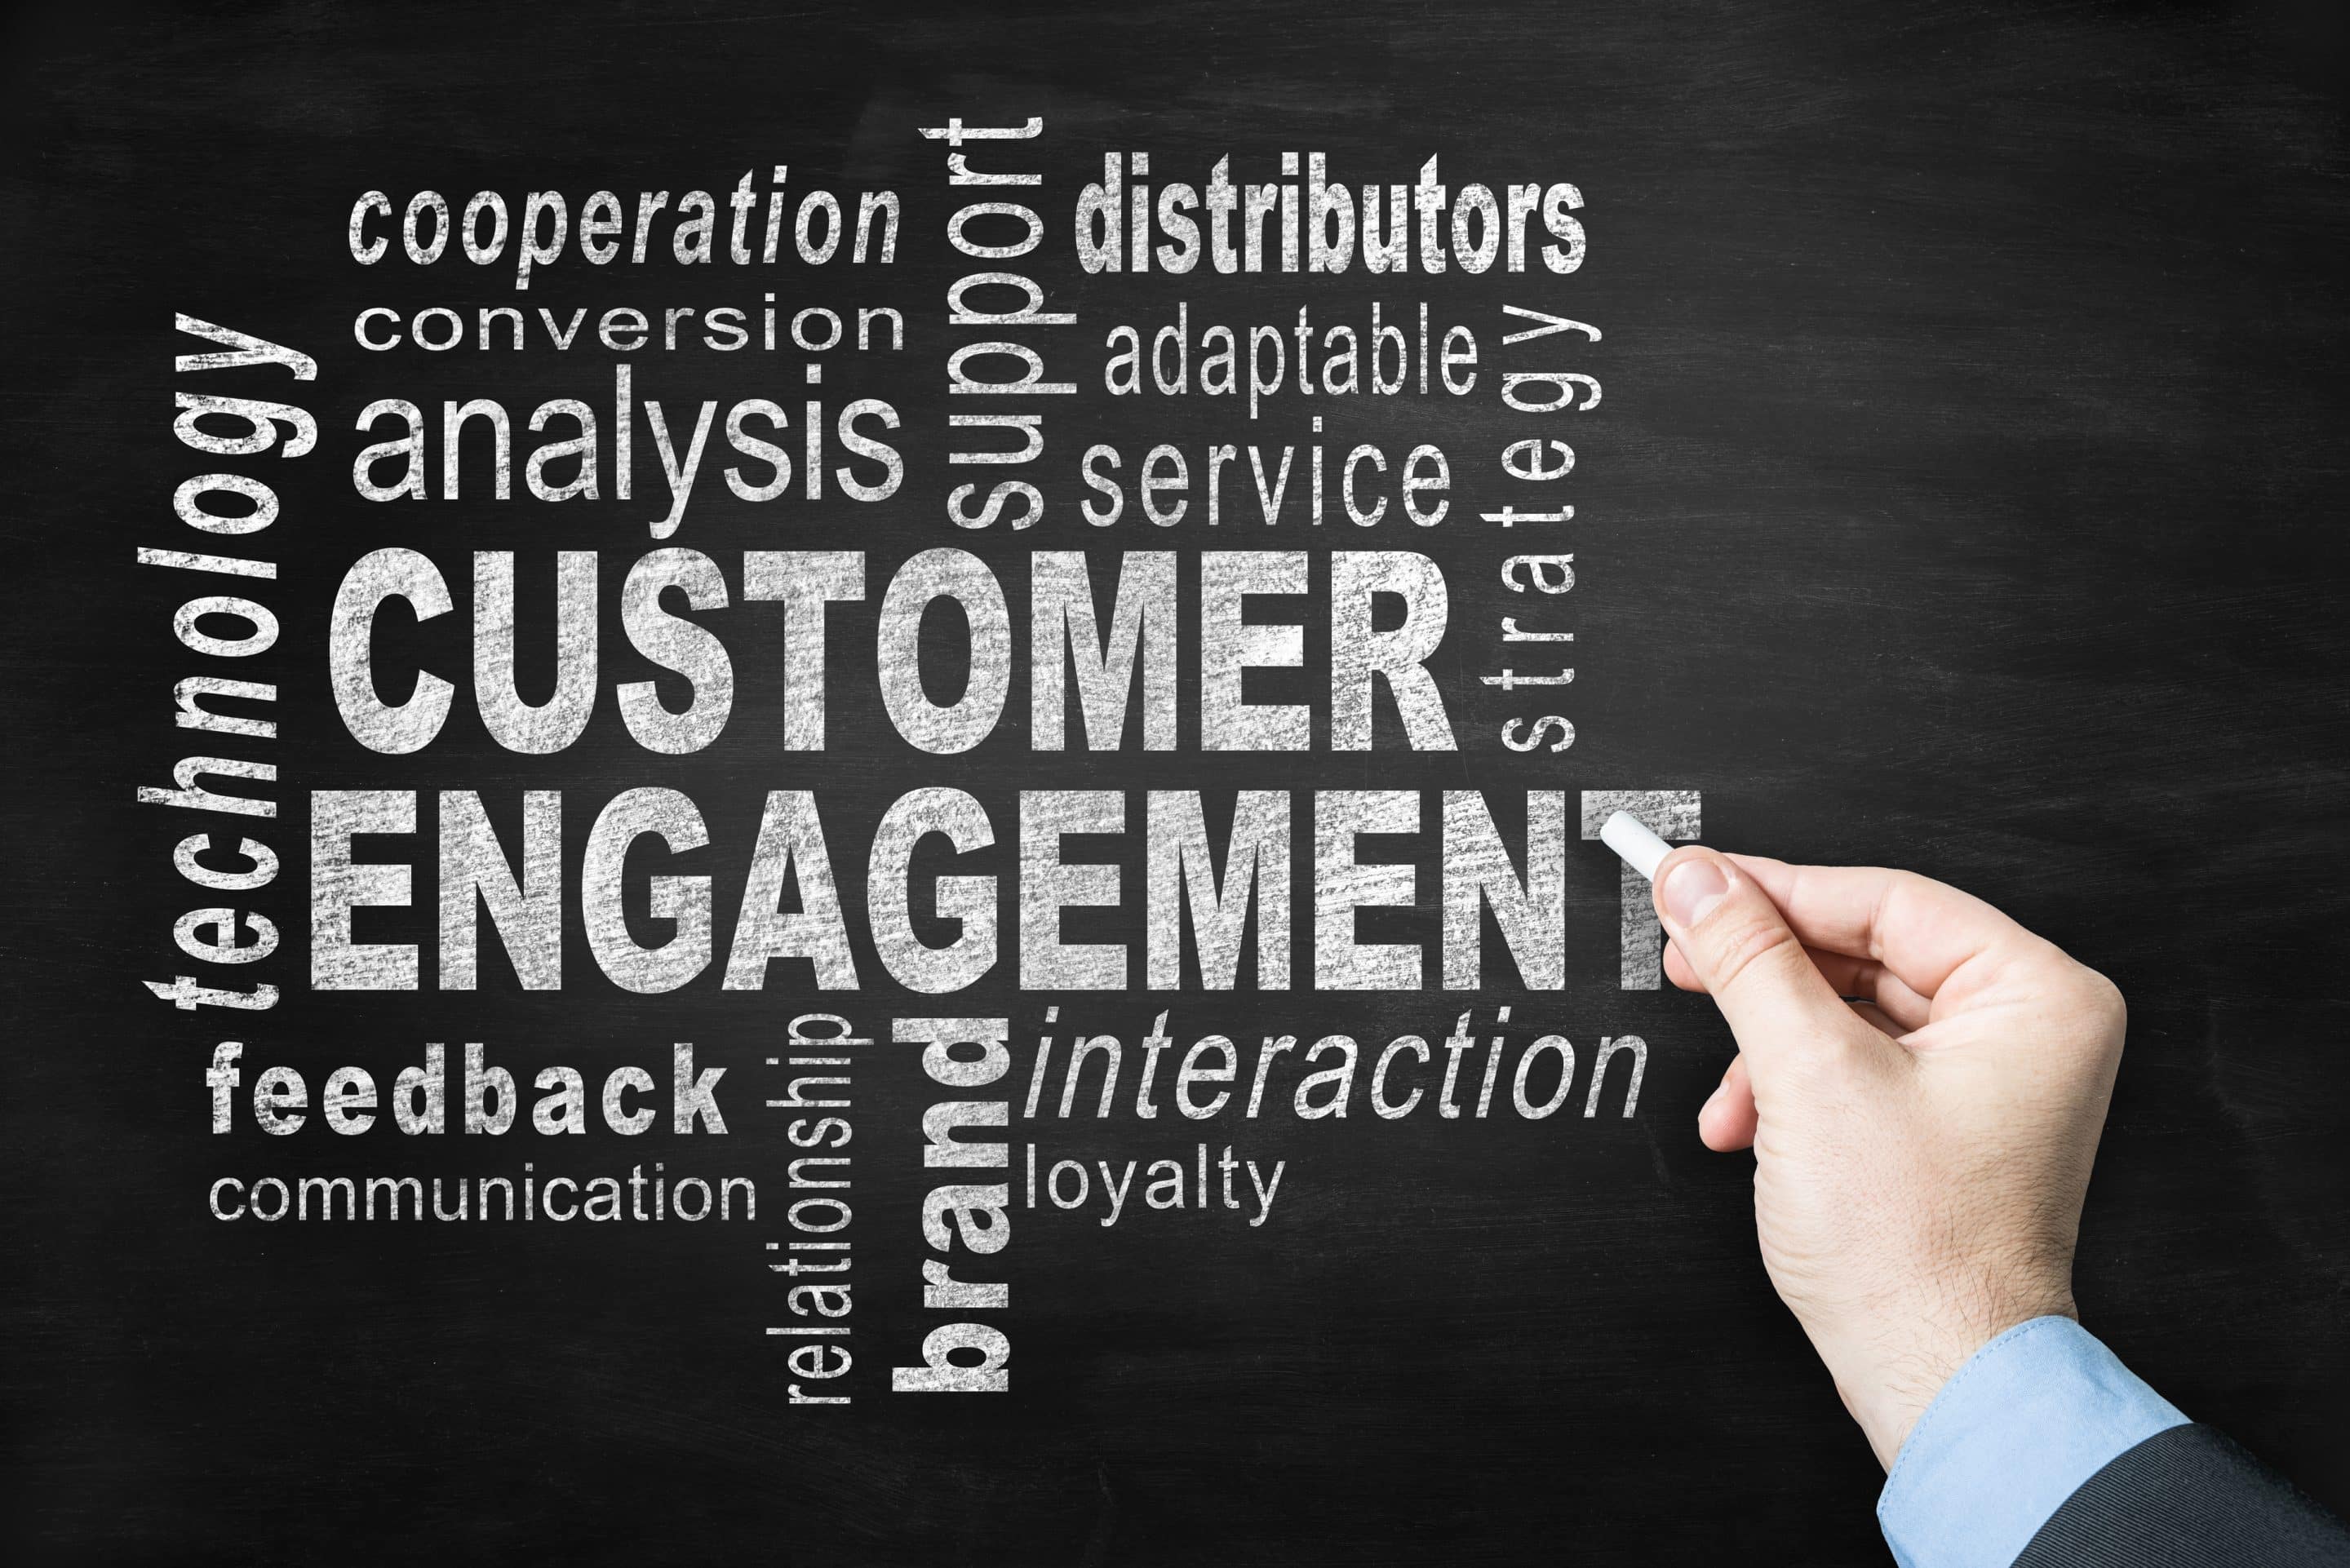 CRM INTEGRATION WITH FIELD SERVICE MANAGEMENT SOFTWARE